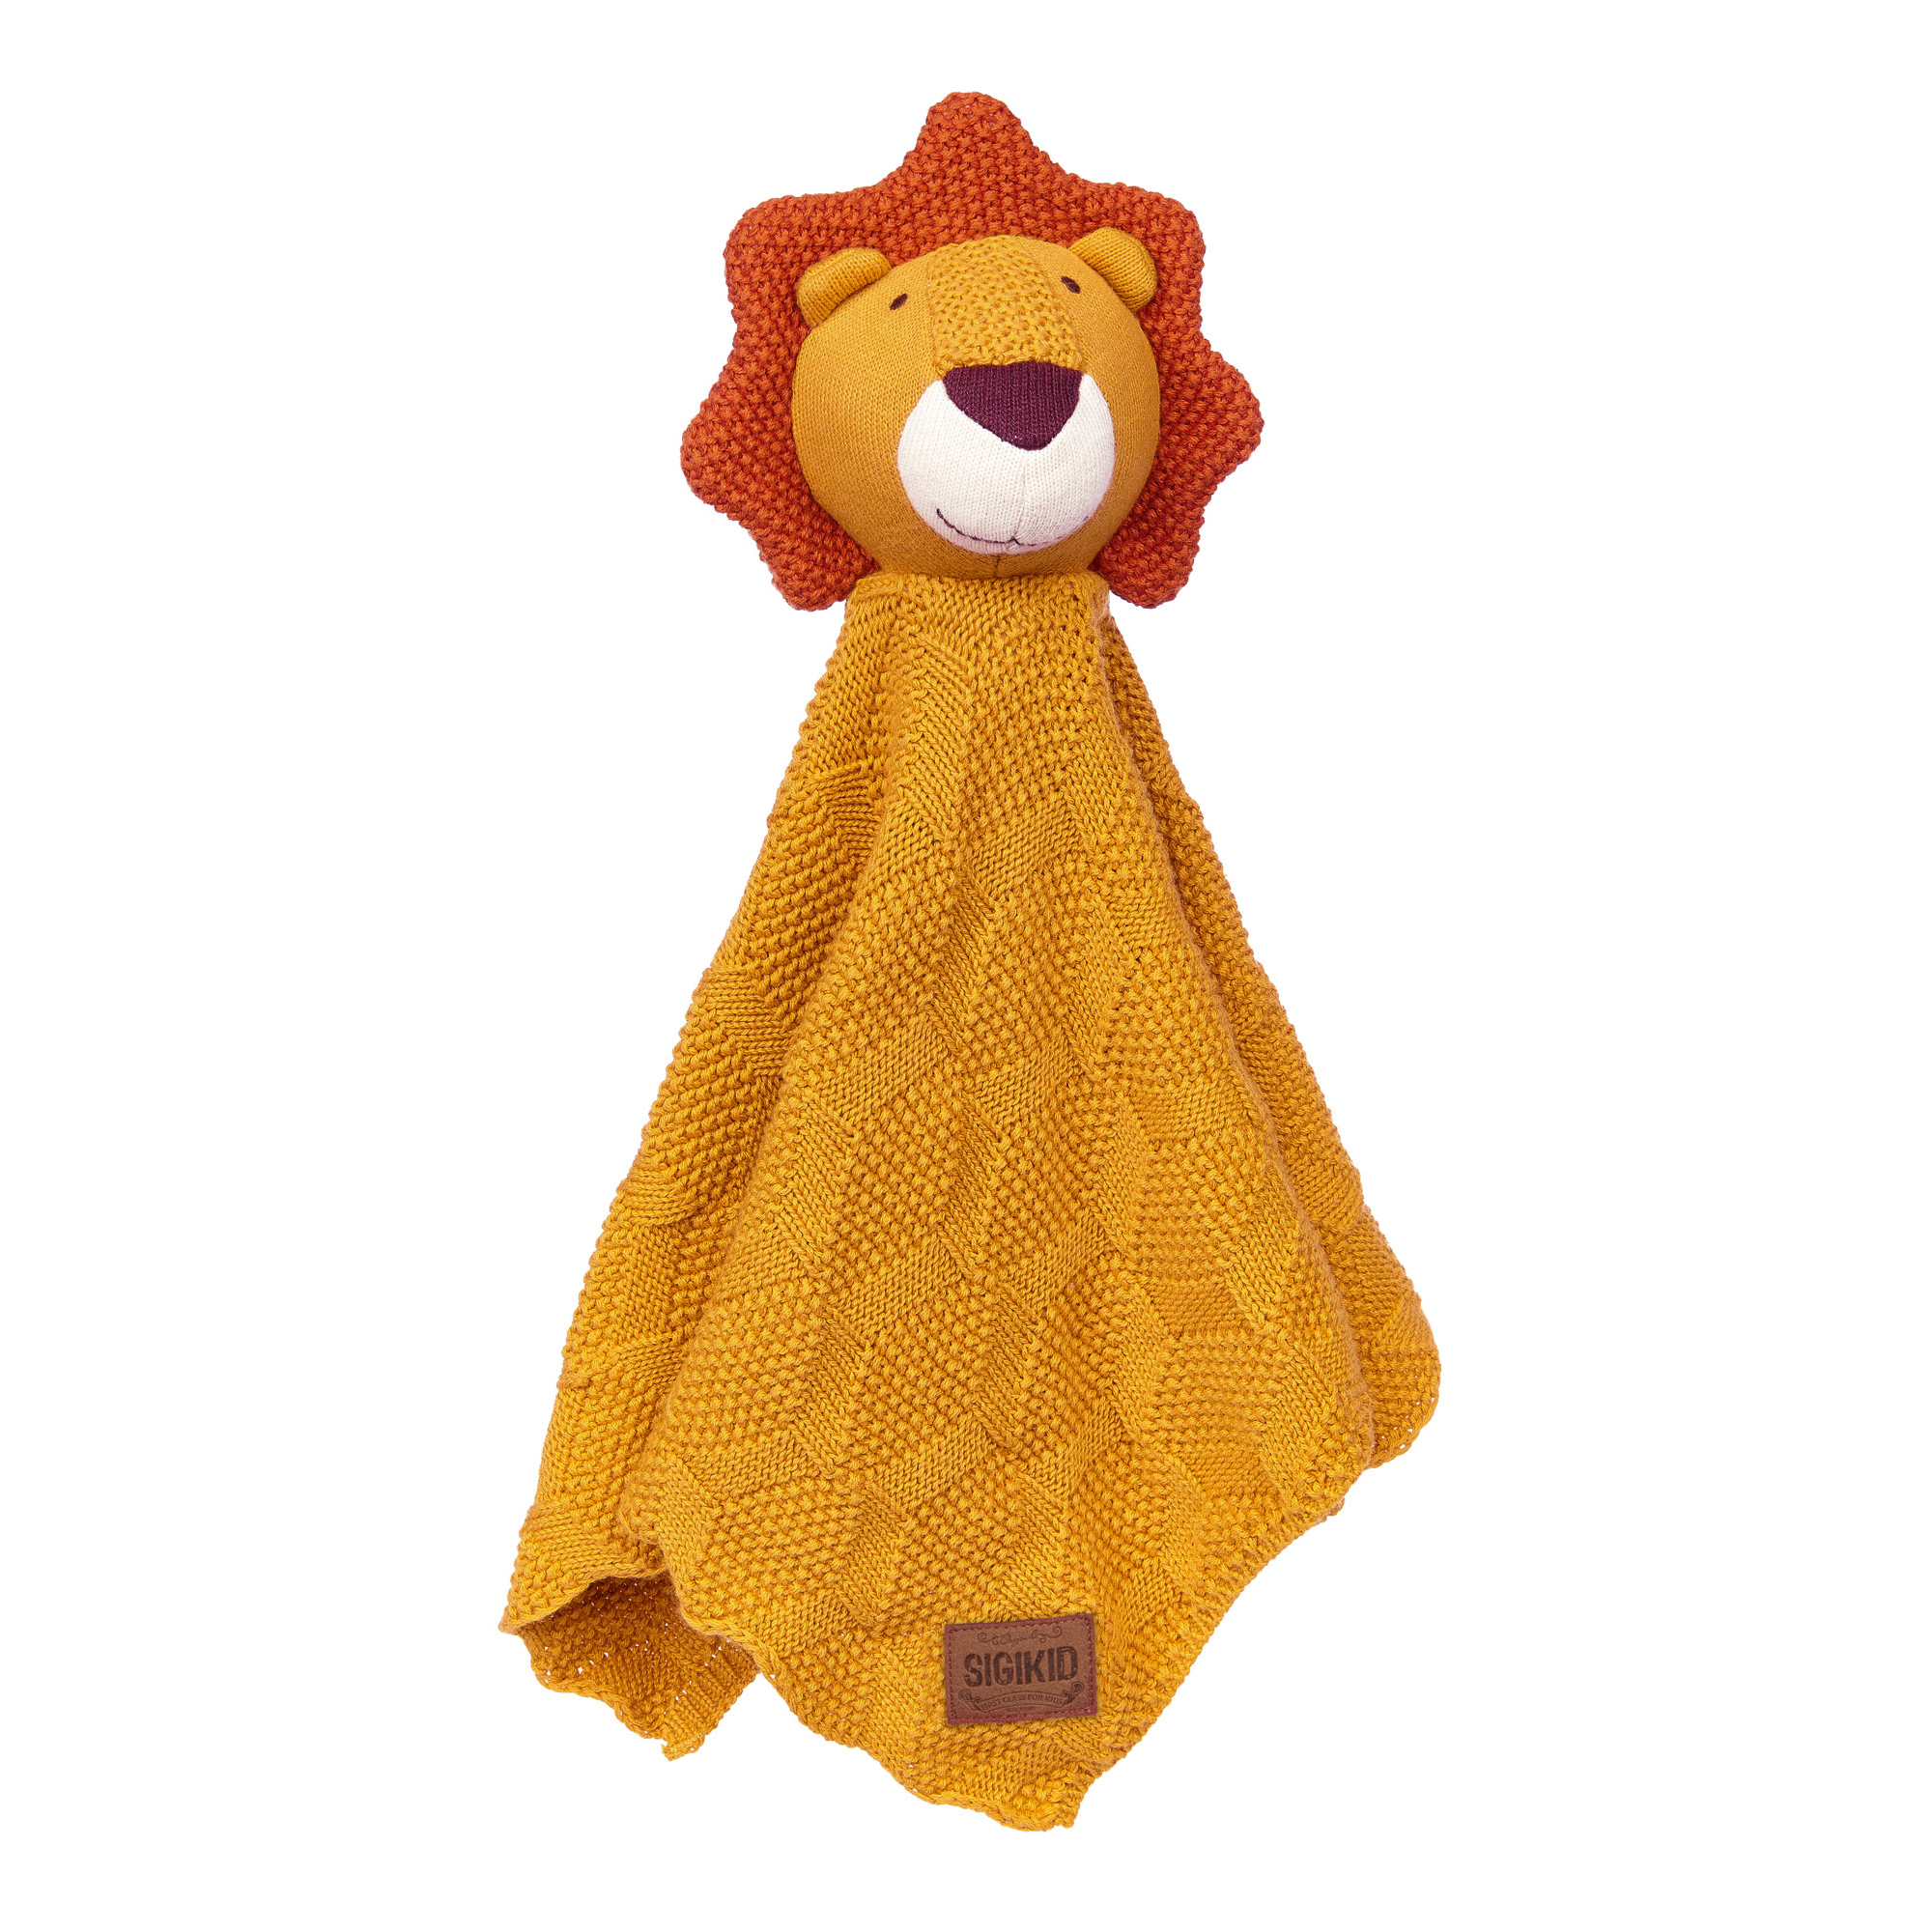 Baby lovey comforter lion, Knitted Love